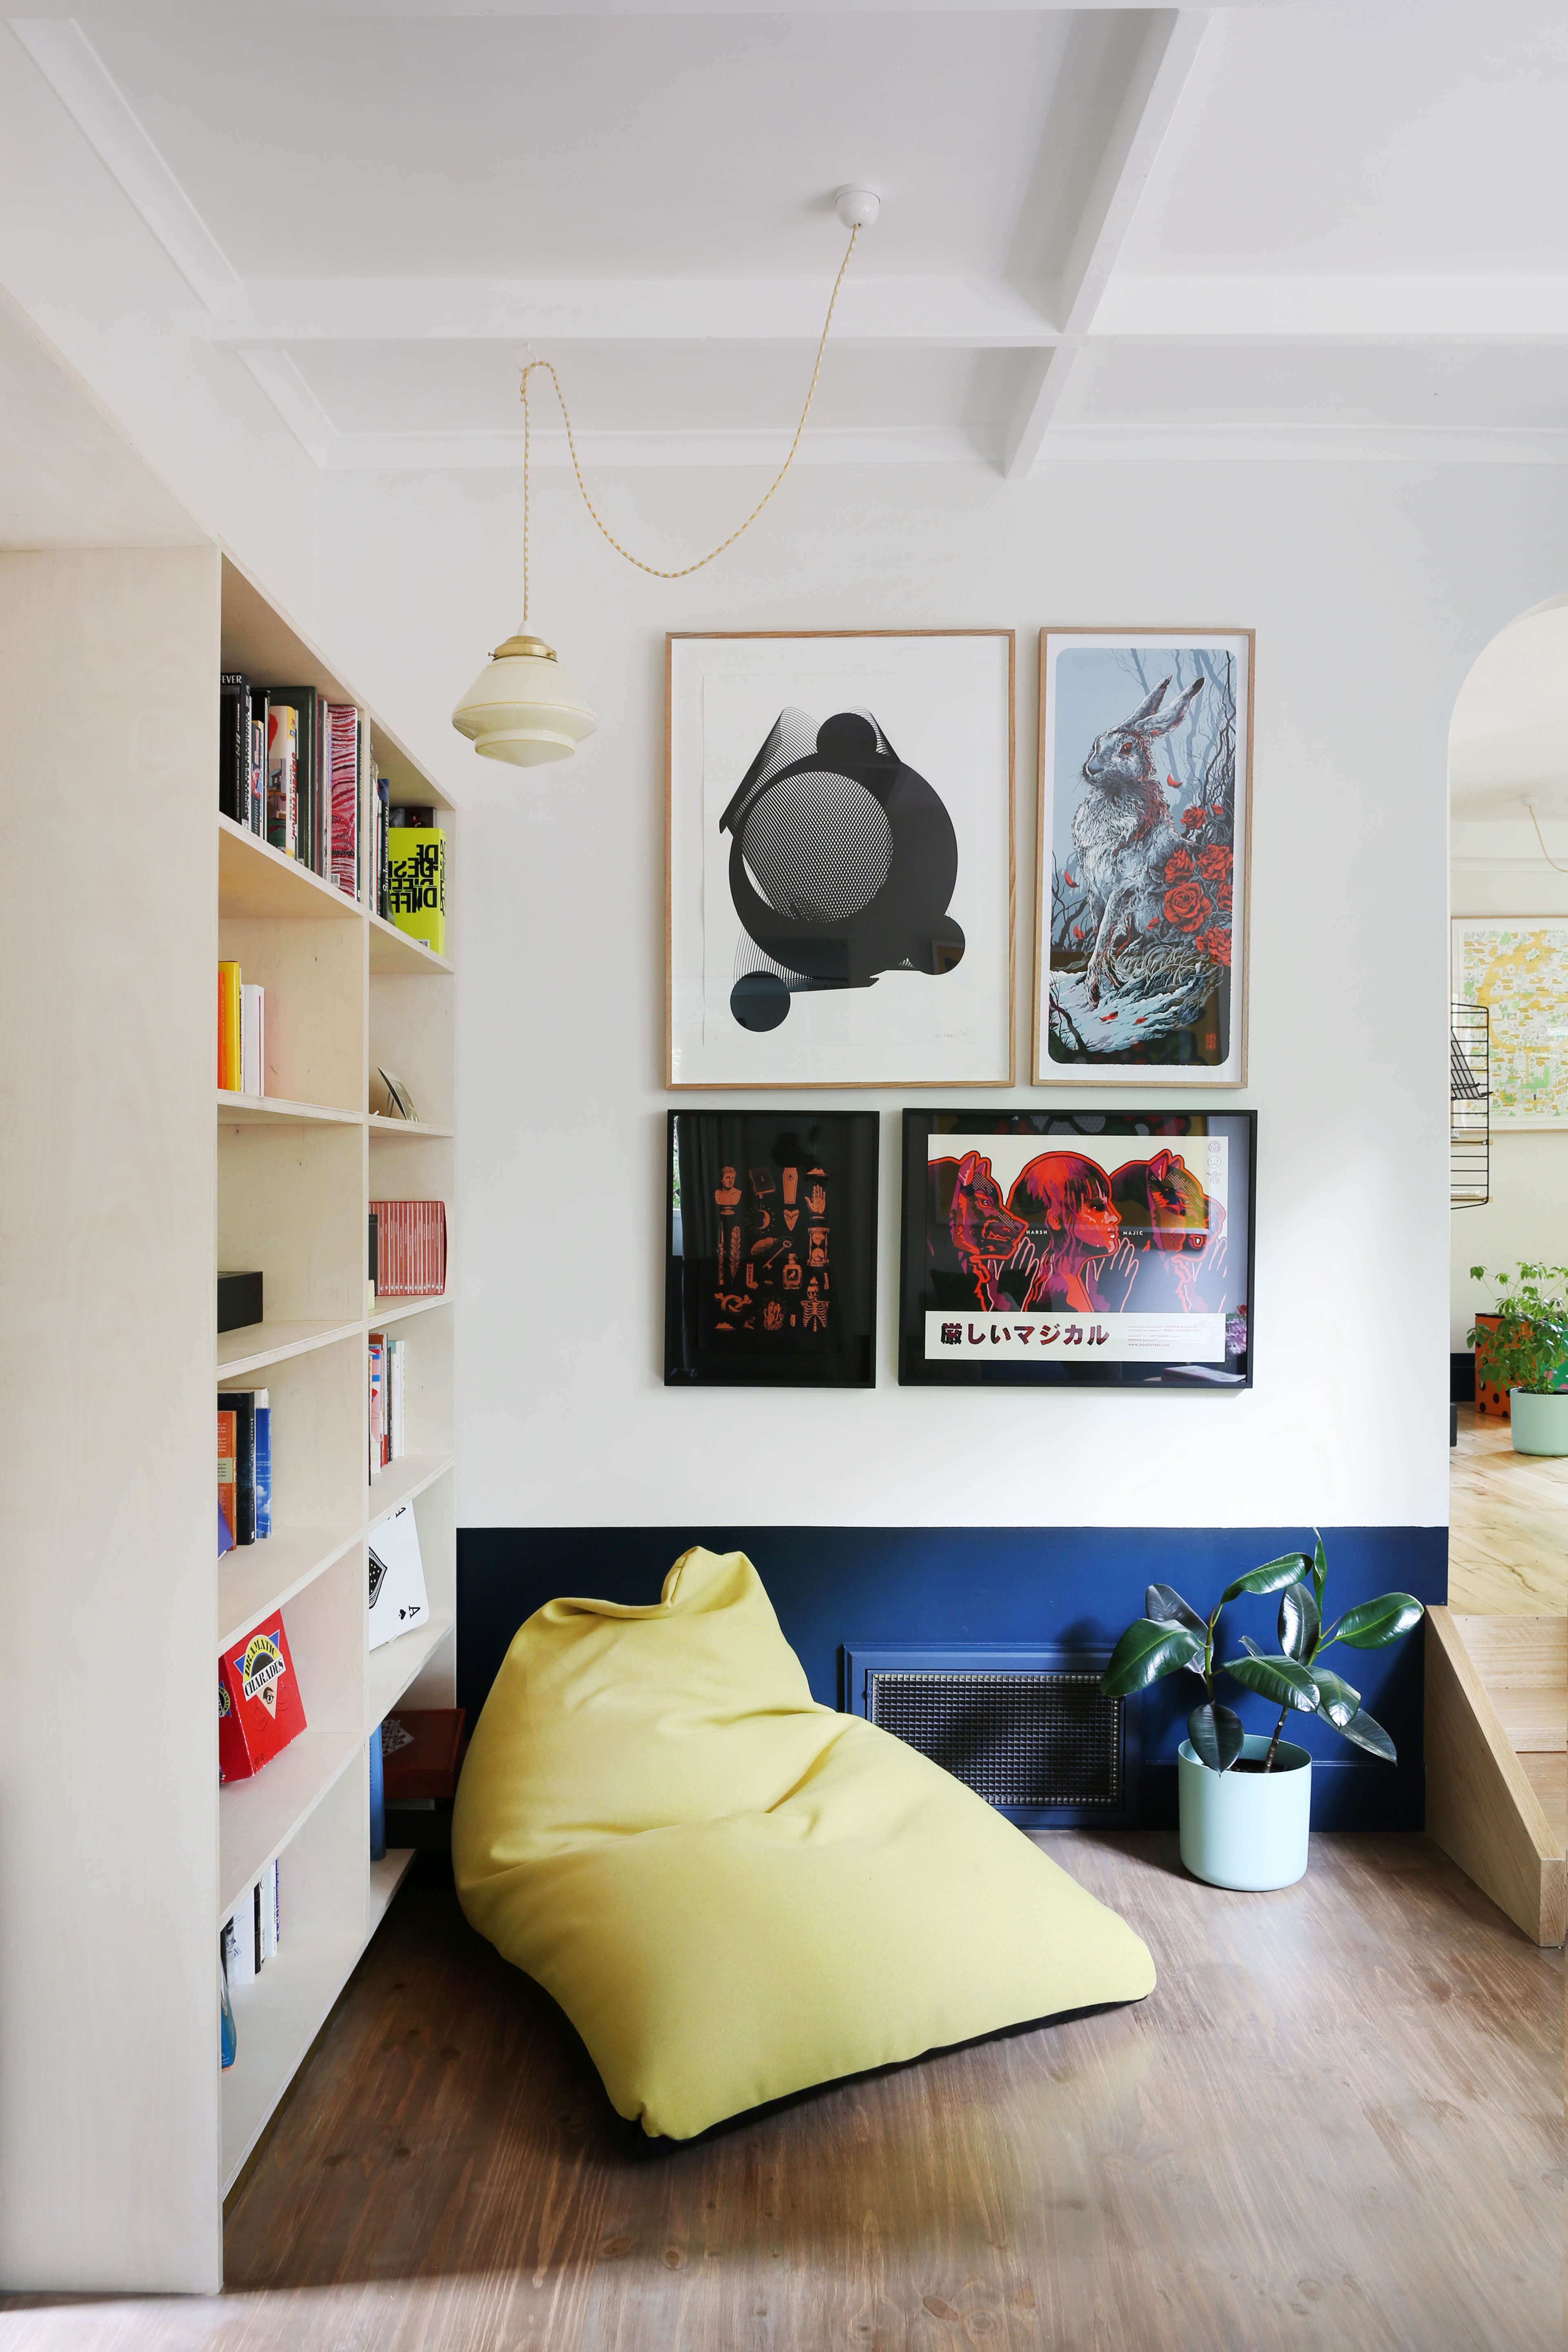 Guest library at Jackie Winter Gardens, a guesthouse and artist residency outside Melbourne, Australia, designed by Searah Trotter of Hearth; Rhiannon Taylor photo| Remodelista